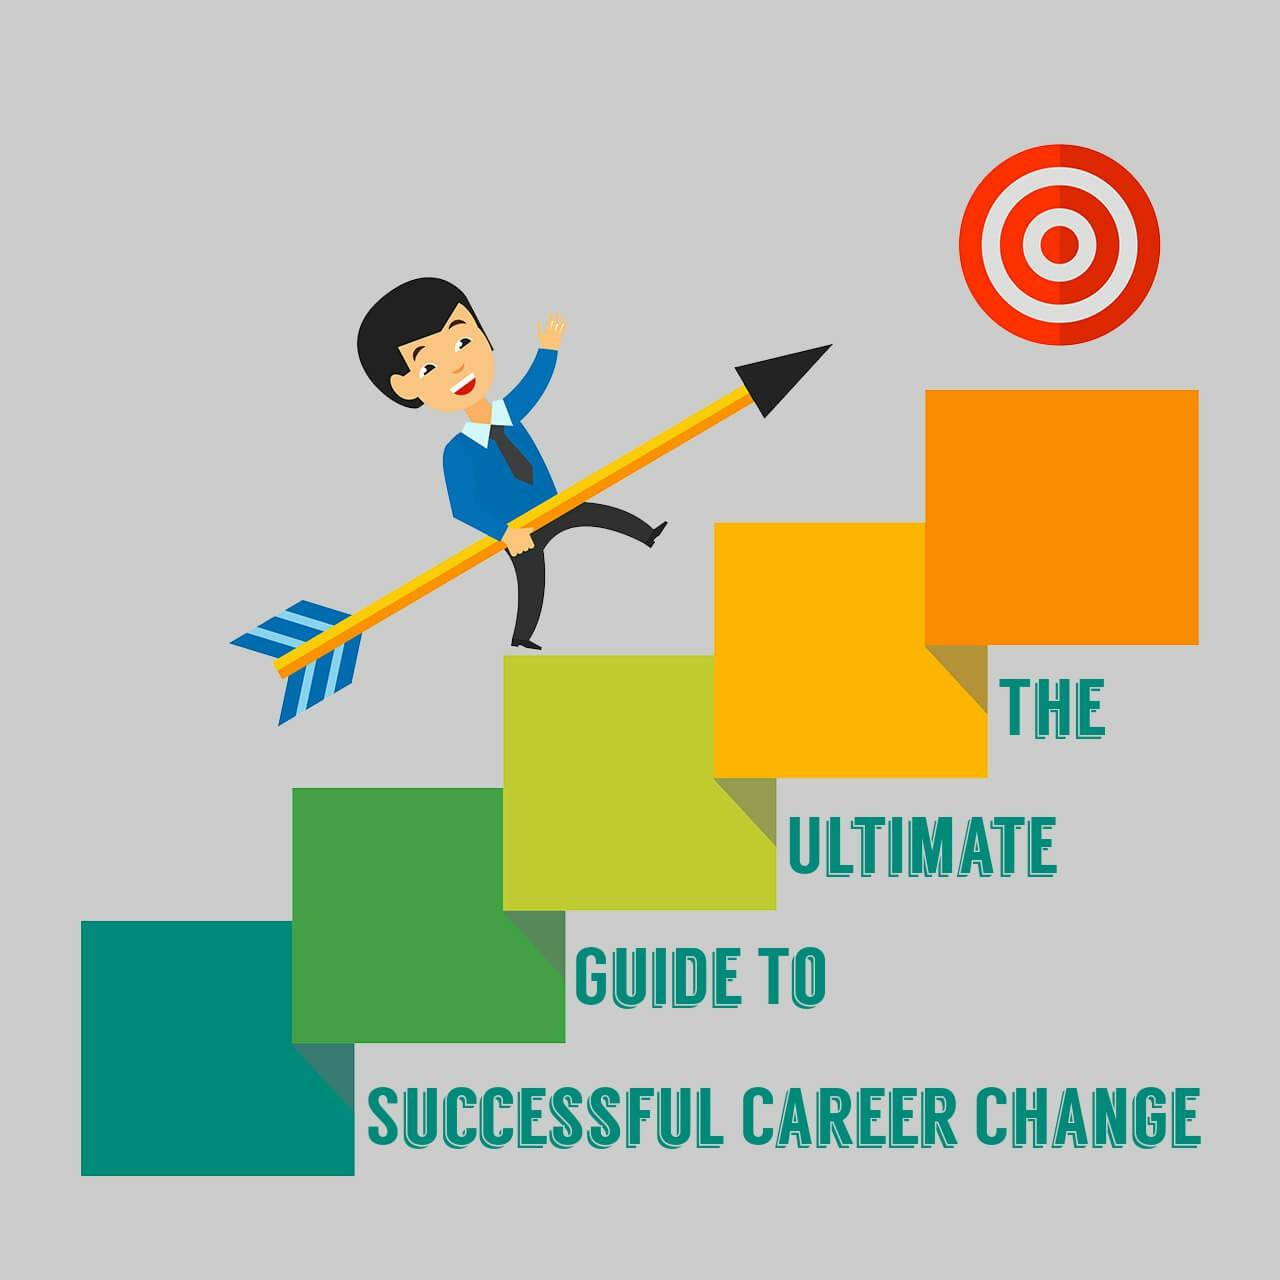 How to make a successful career change